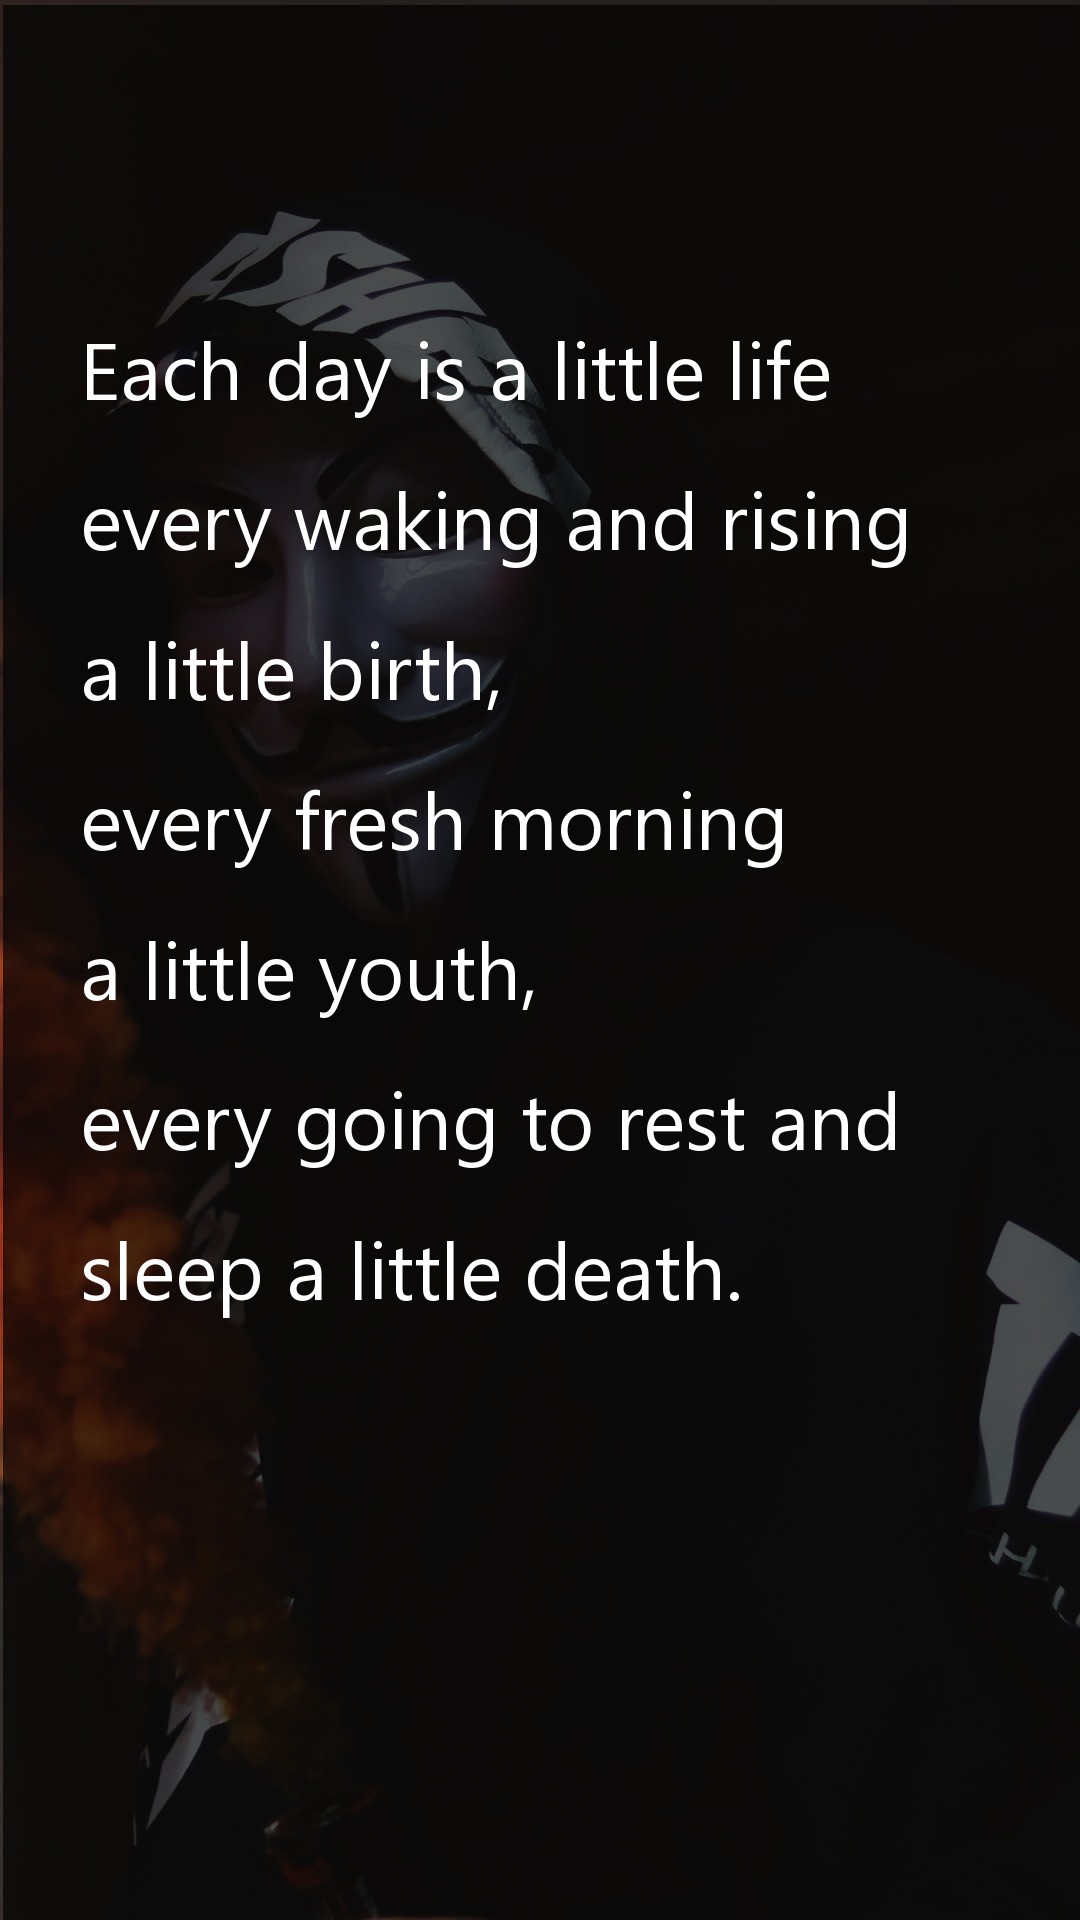 Each day is a little life - Death Quotes at statush.com